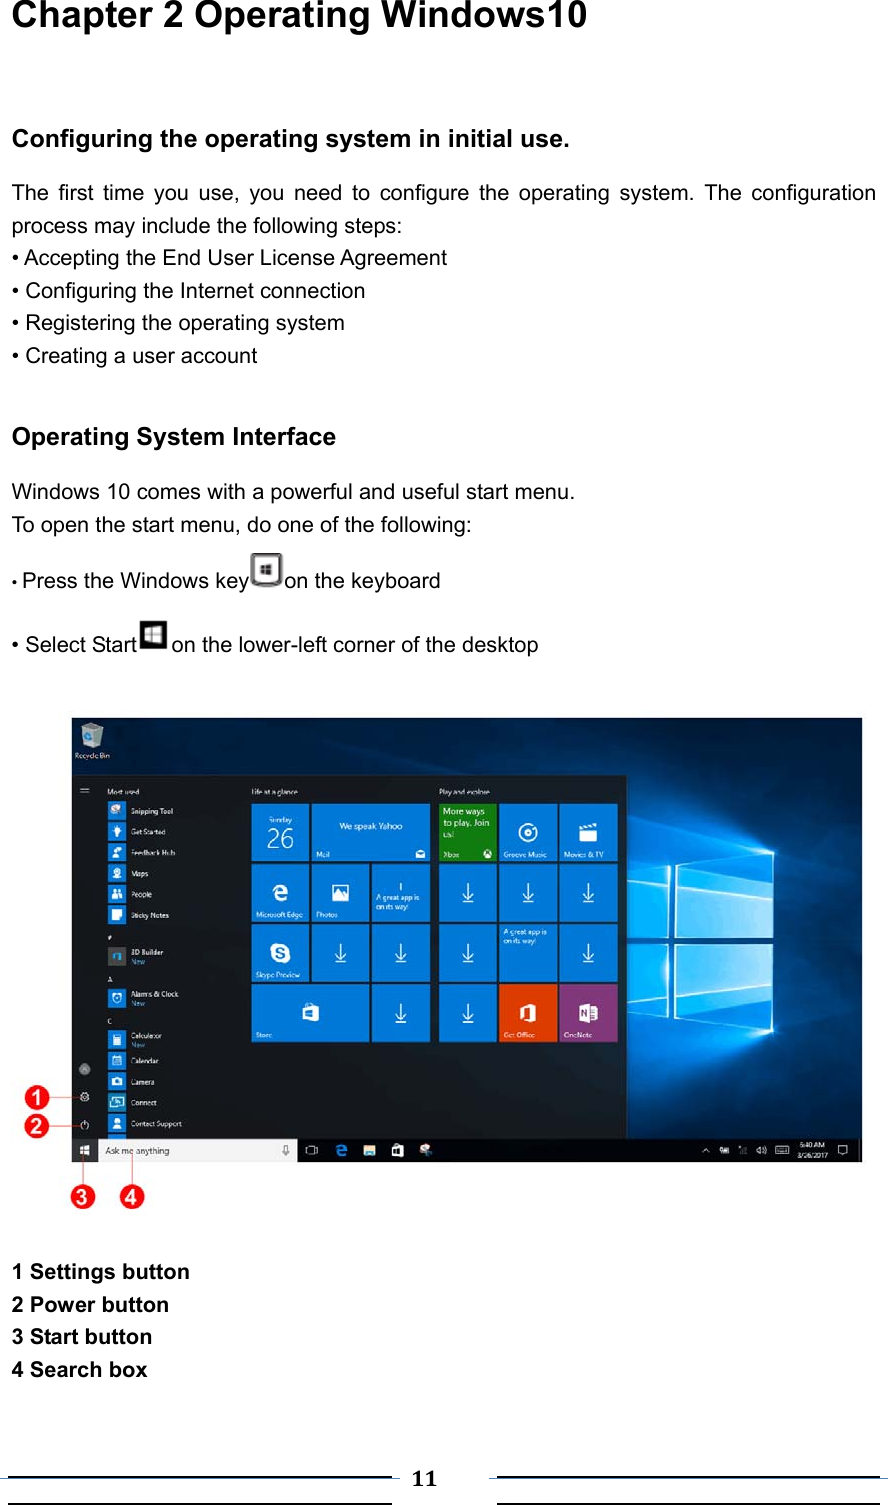  11 Chapter 2 Operating Windows10   Configuring the operating system in initial use.   The first time you use, you need to configure the operating system. The configuration process may include the following steps: • Accepting the End User License Agreement • Configuring the Internet connection • Registering the operating system   • Creating a user account  Operating System Interface Windows 10 comes with a powerful and useful start menu.   To open the start menu, do one of the following: • Press the Windows key on the keyboard • Select Start on the lower-left corner of the desktop    1 Settings button   2 Power button 3 Start button 4 Search box  